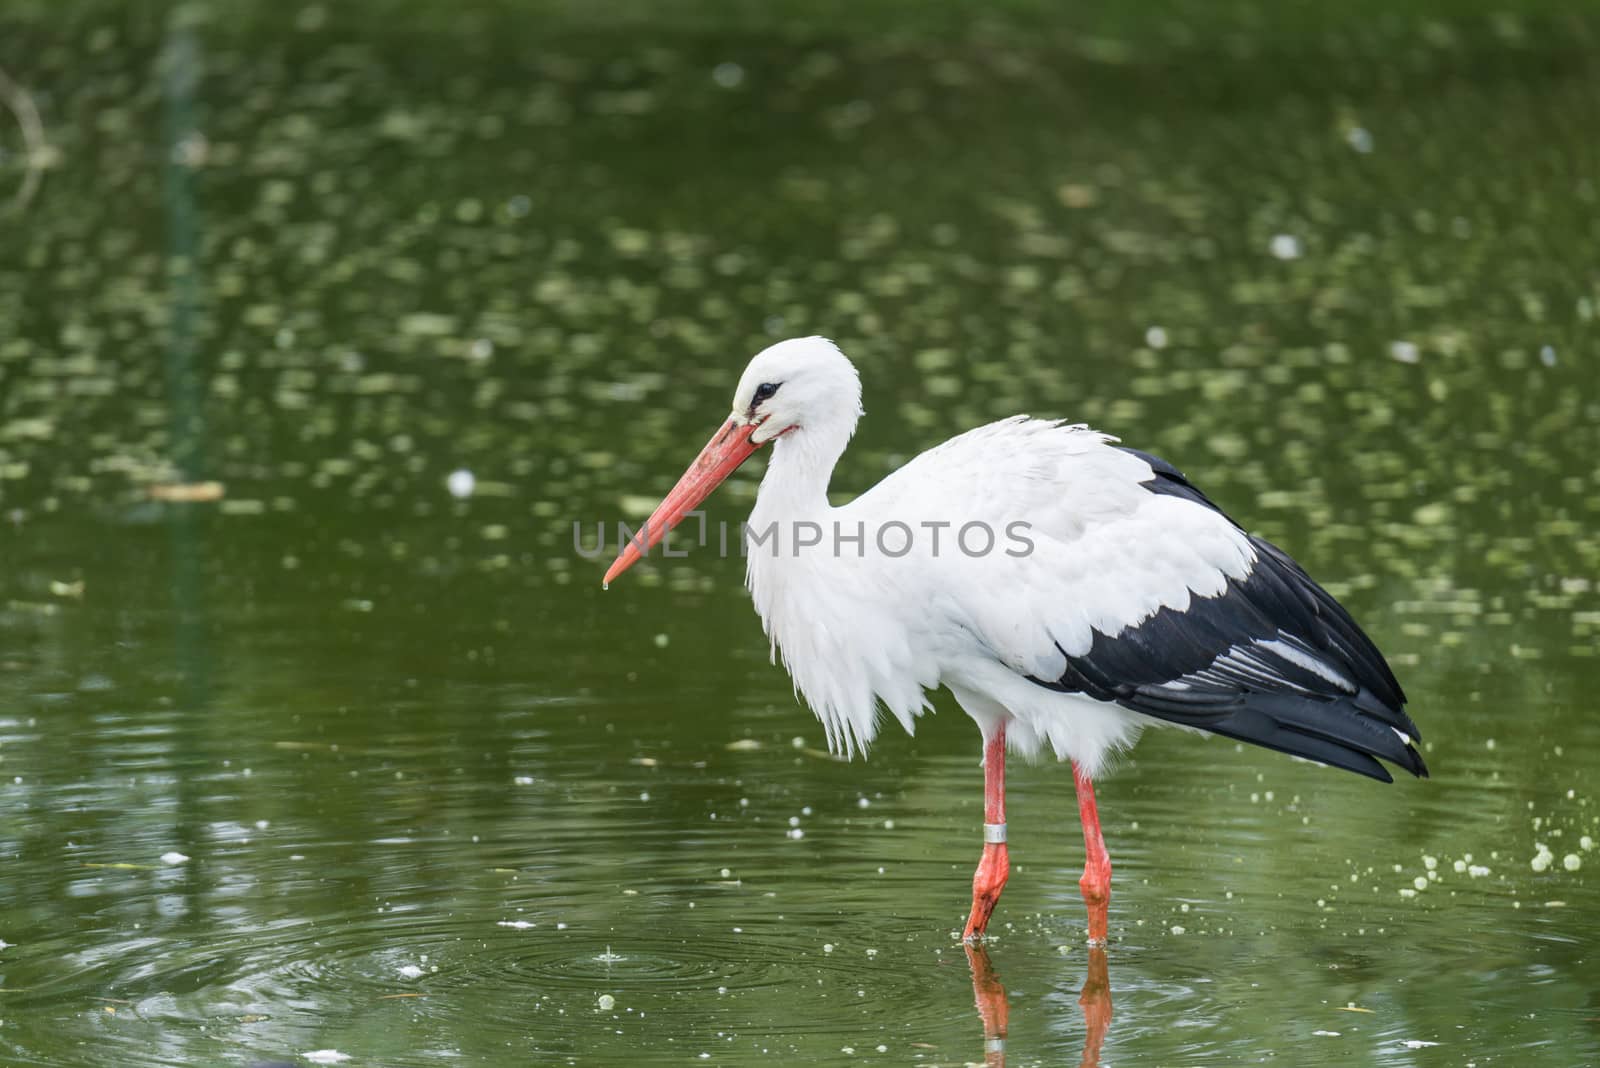 Big mouth bird standing in water in a zoo